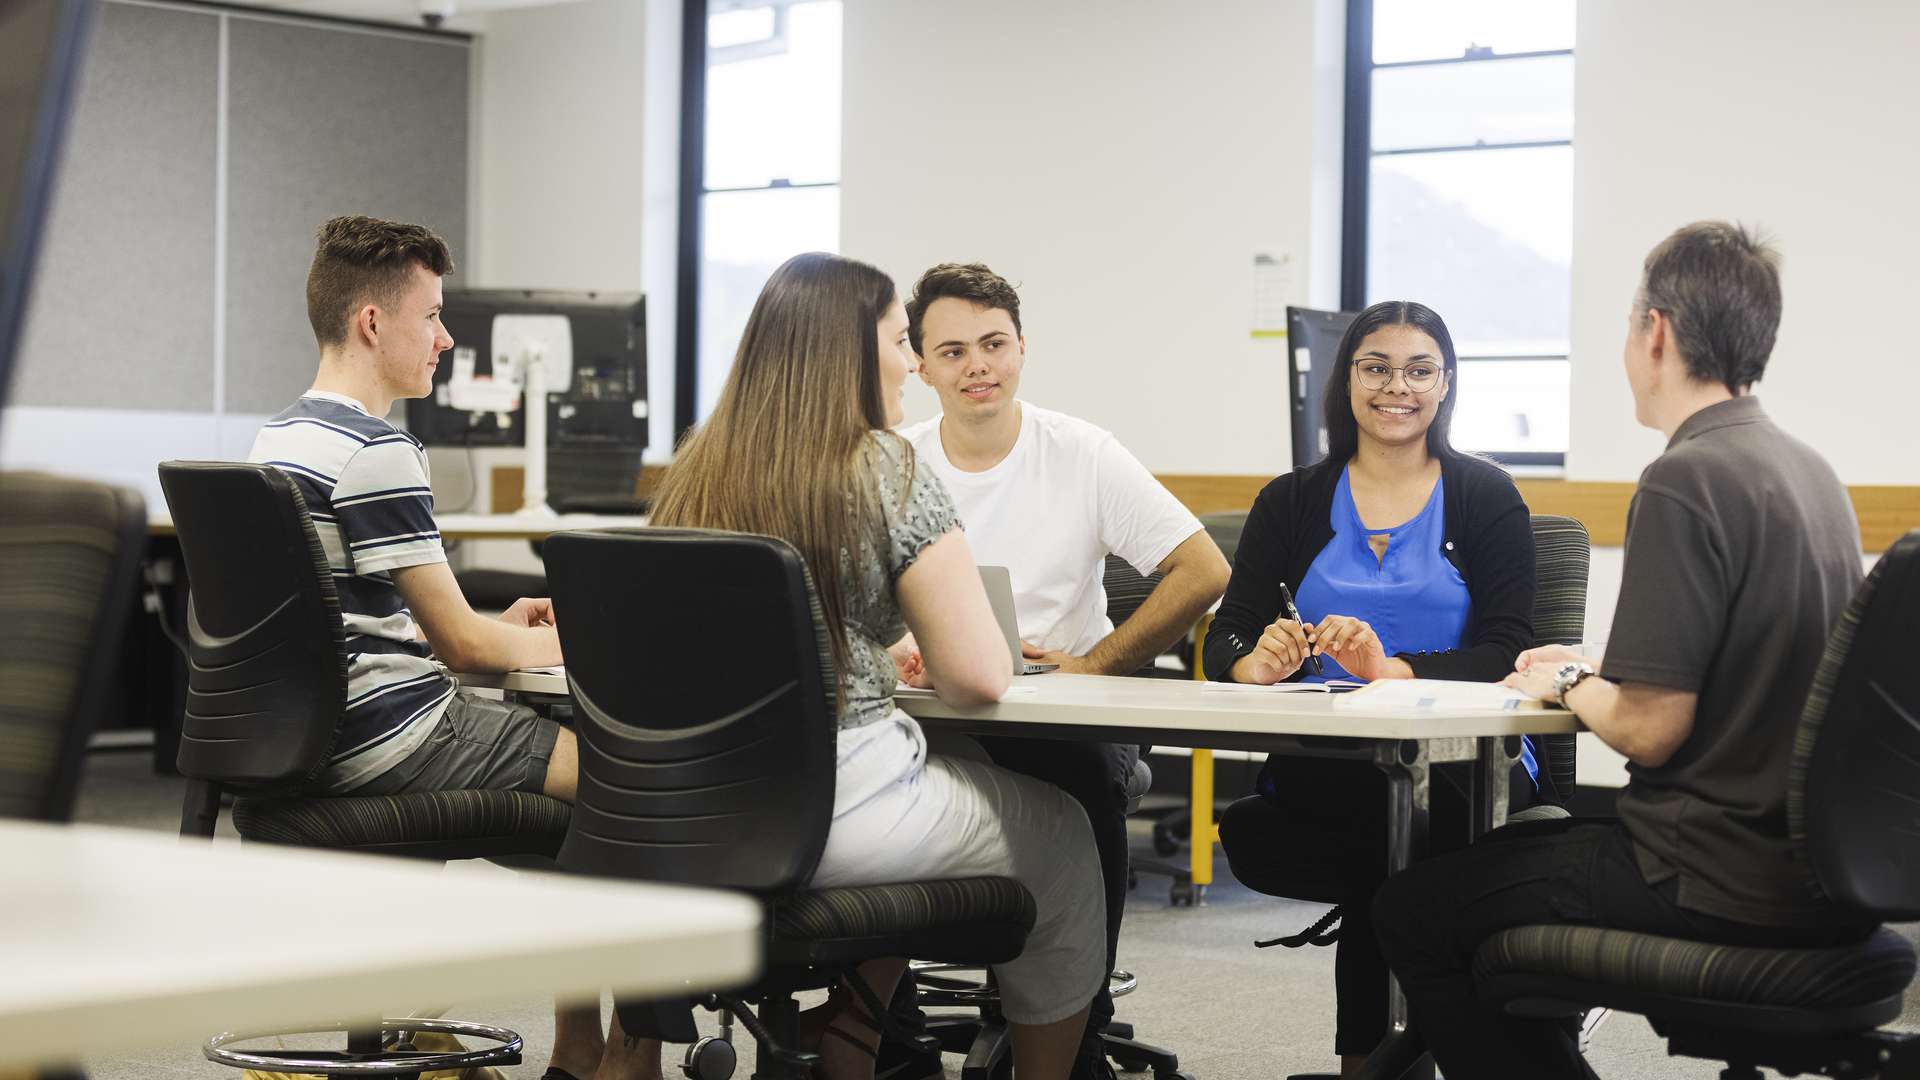 Five students sitting down having a discussion.